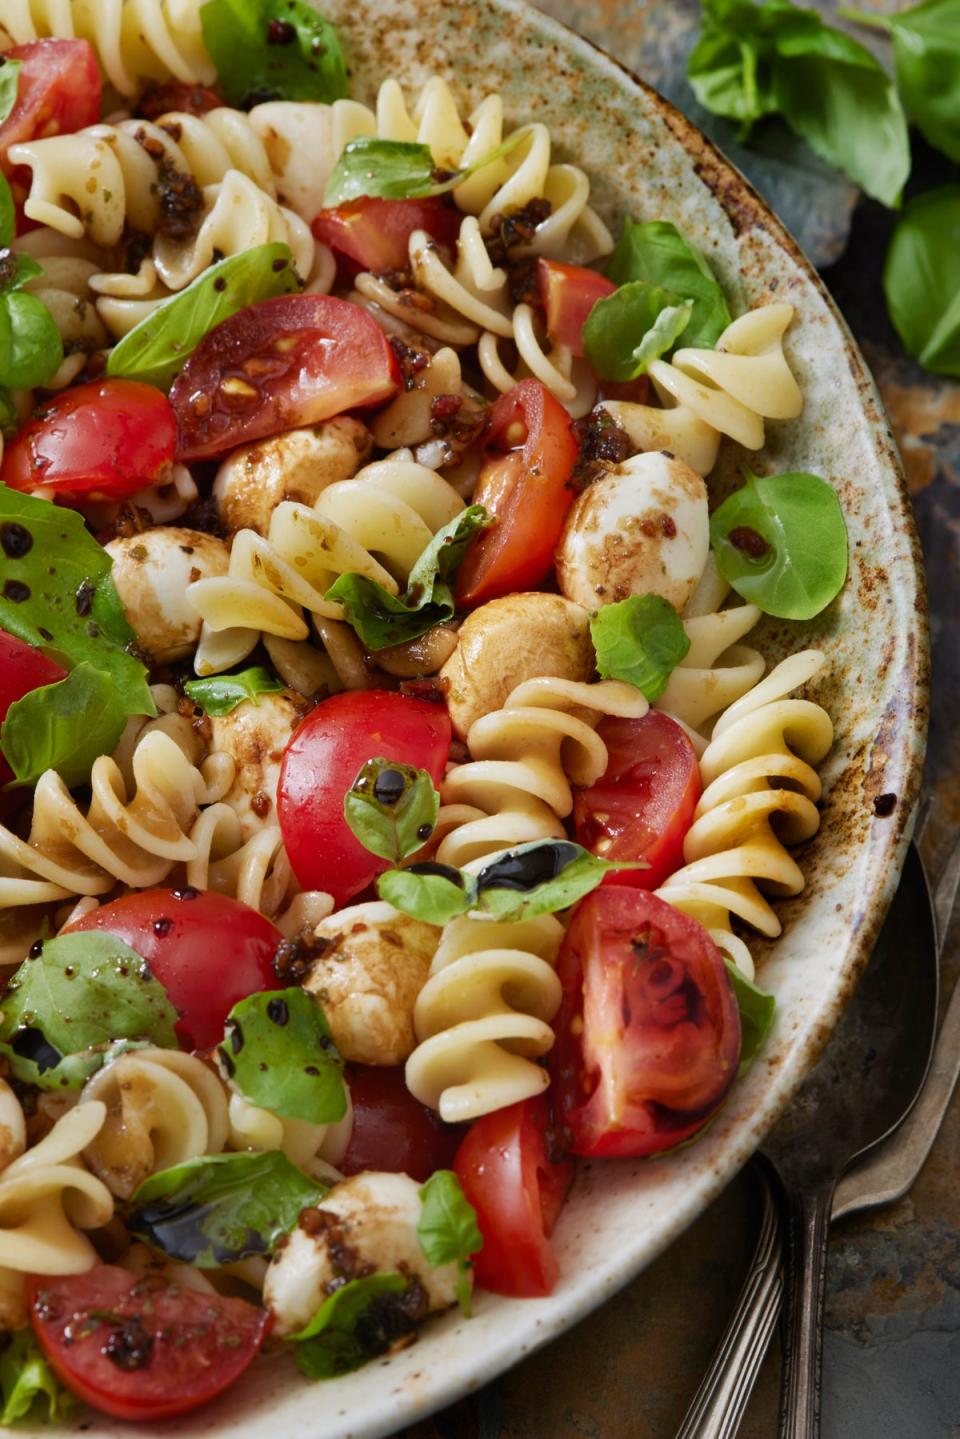 This pasta salad has everything you could want (Getty)